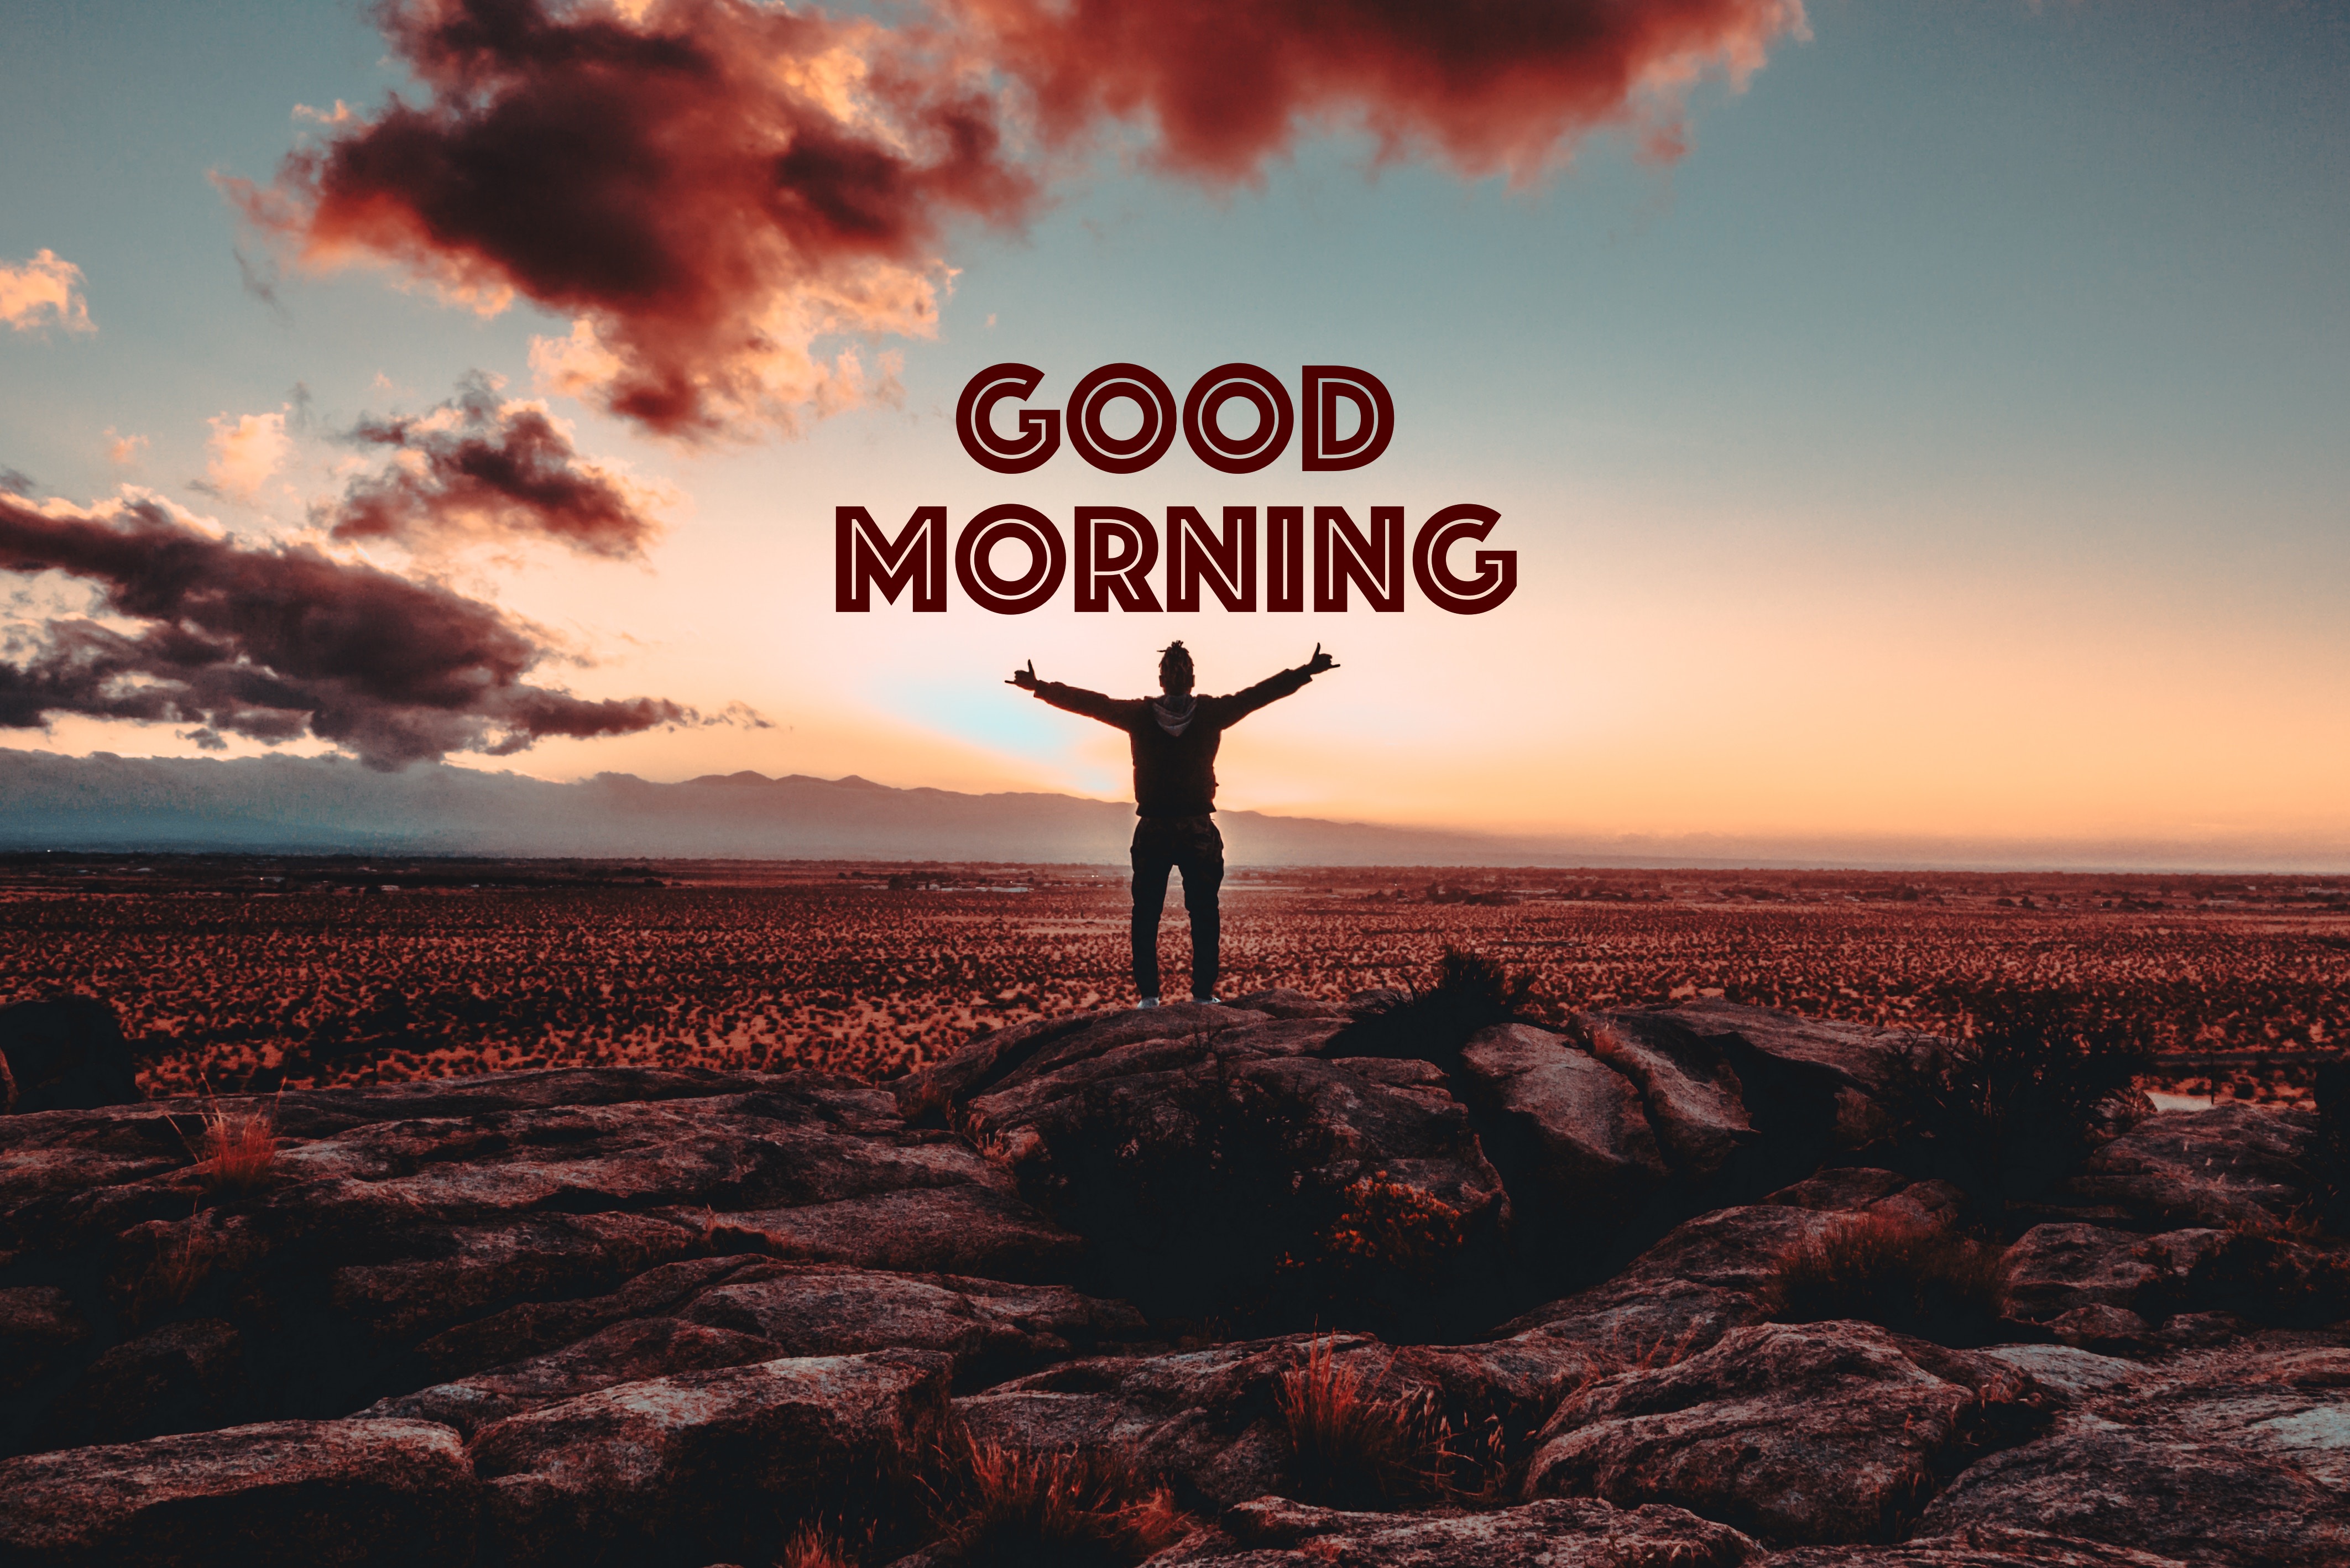 Best Morning wallpapers for phone screen